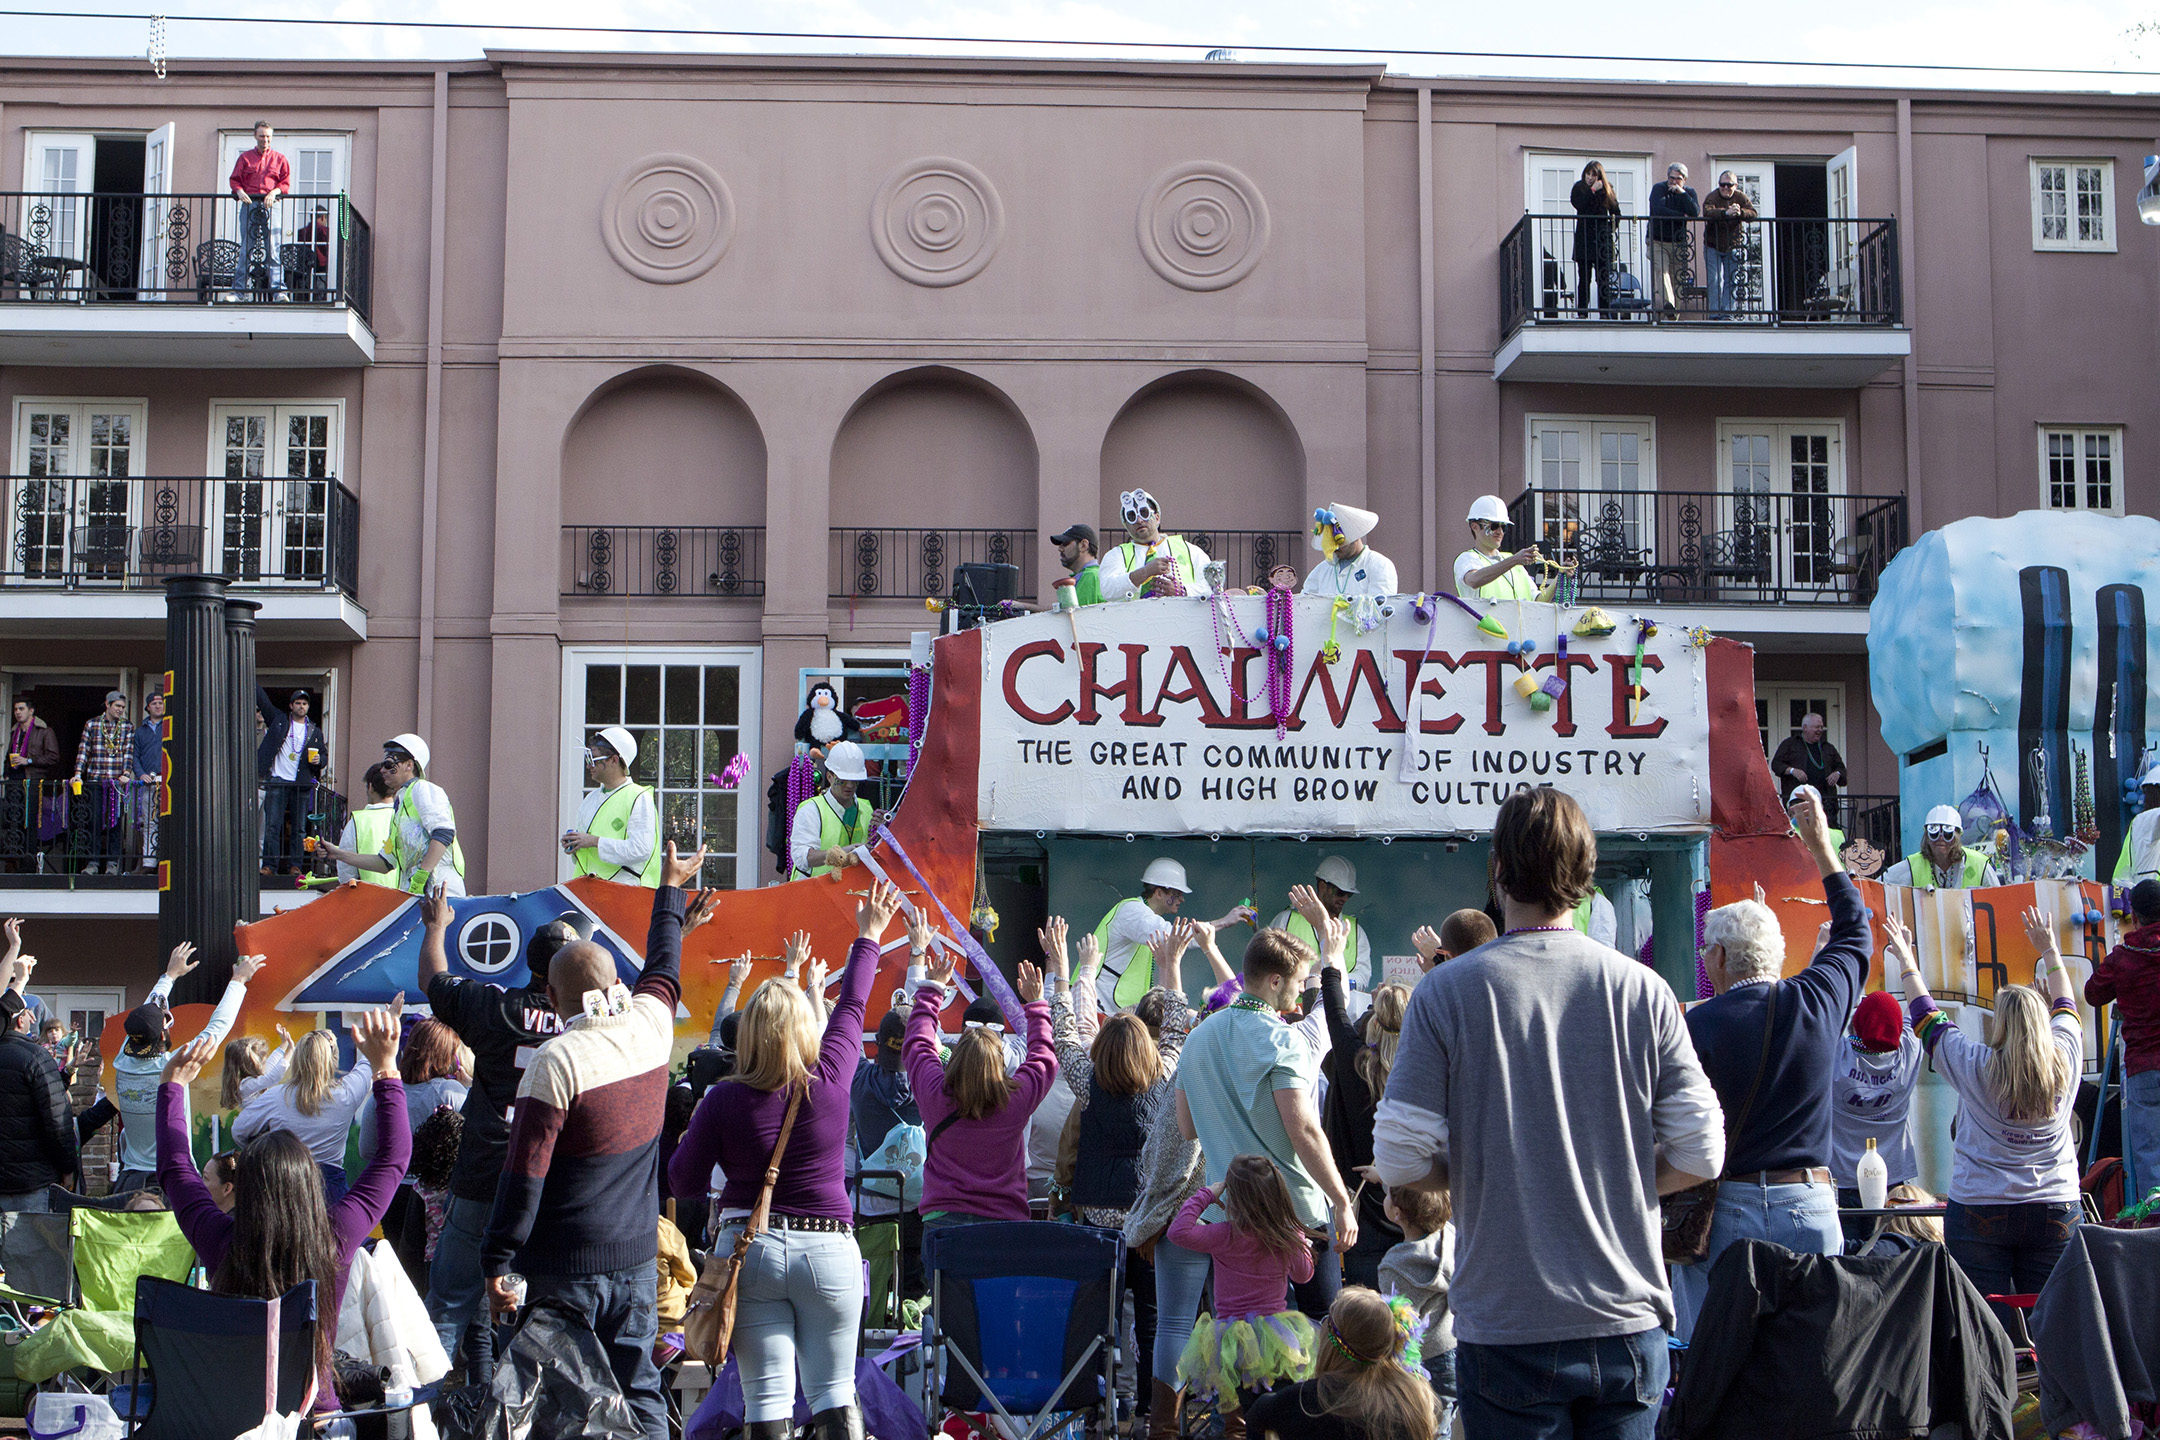 The Tucks Parade, led by its signature giant toilet float, is a day parade known for its use of playful commentary and satire.